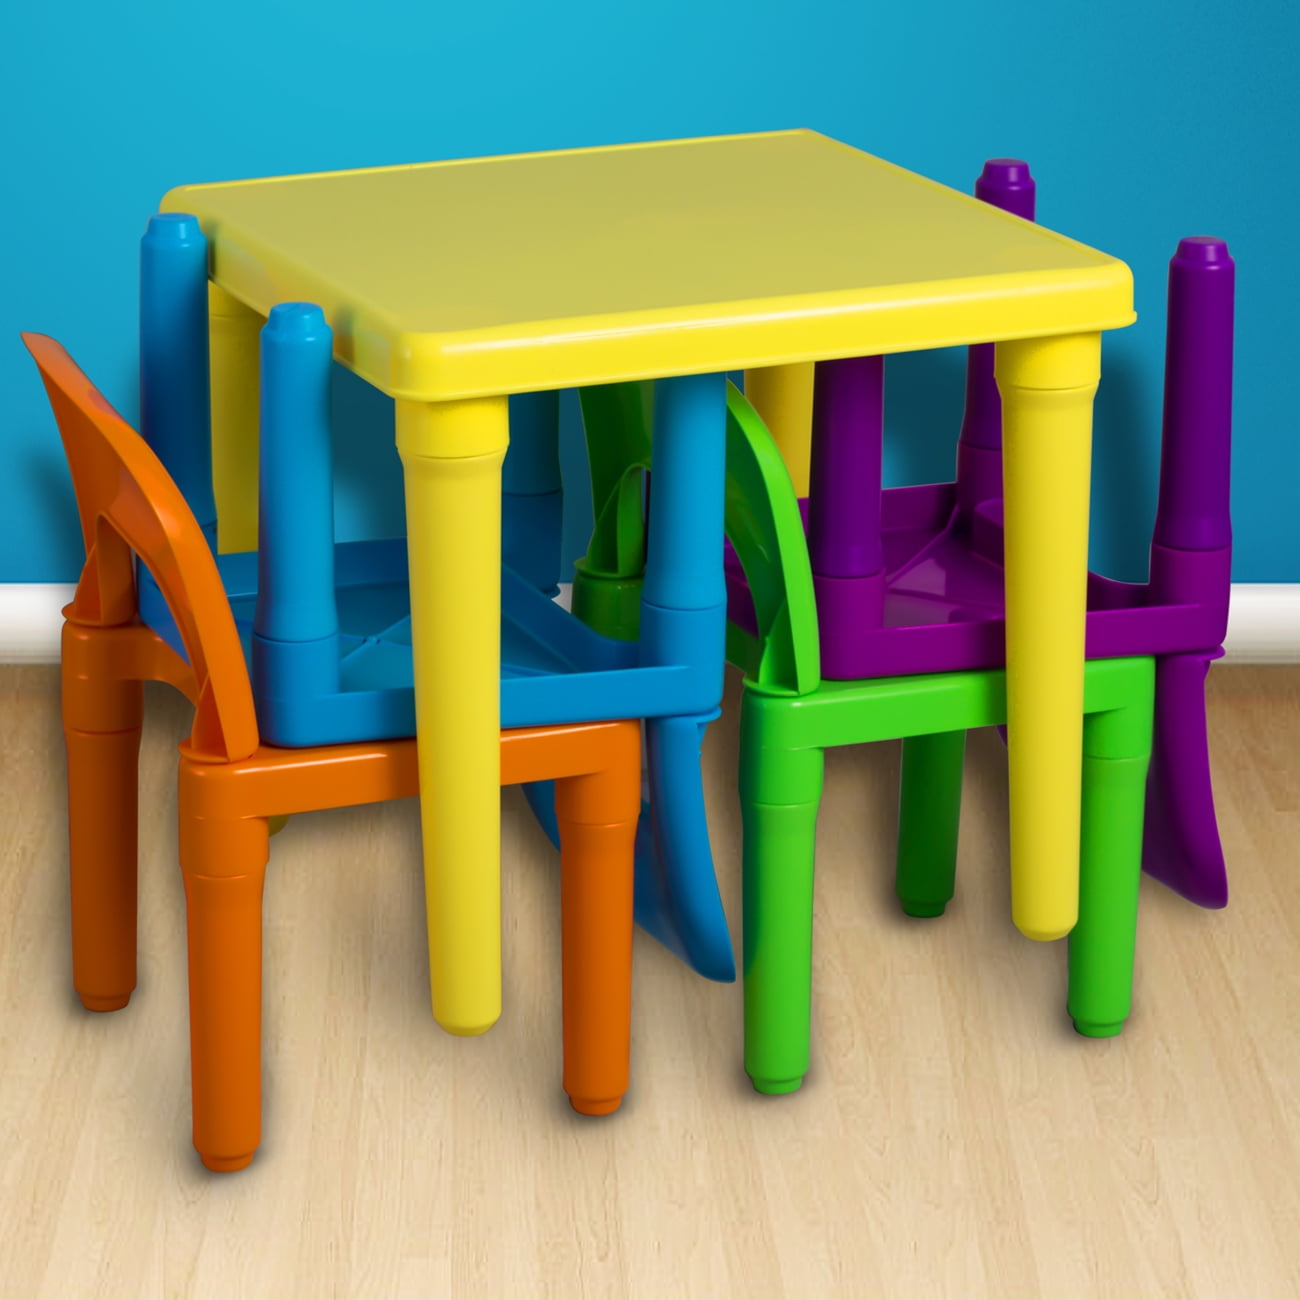 den haven kids table and chairs play set colorful child toy activity desk  for toddler sturdy plastic